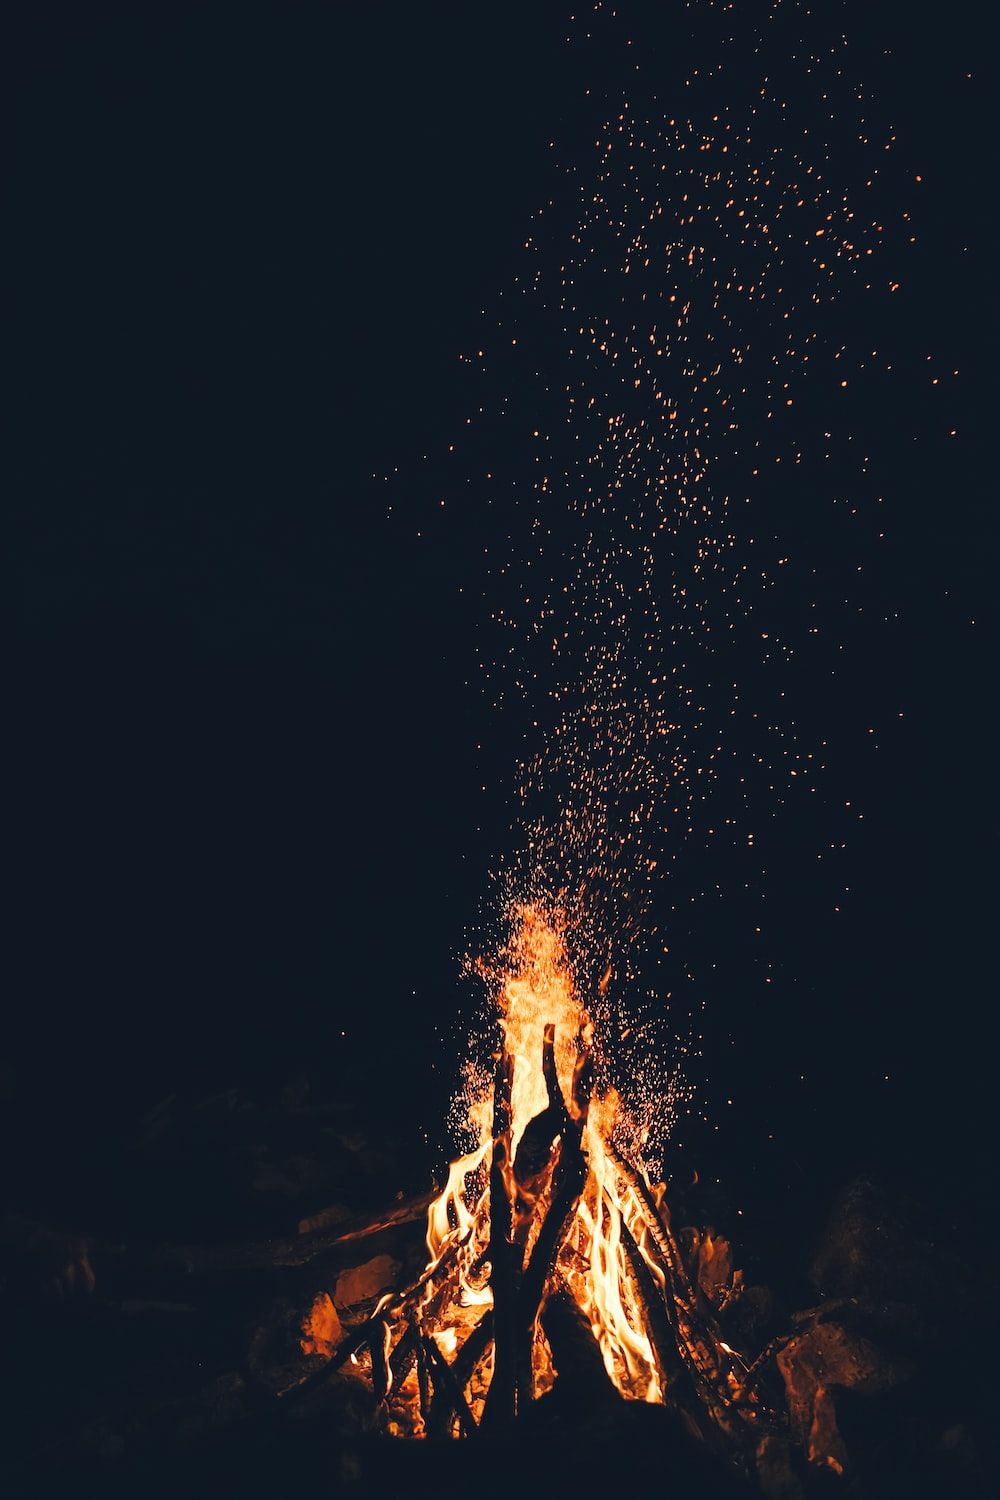 A fire is burning in the dark - Fire, magic, camping